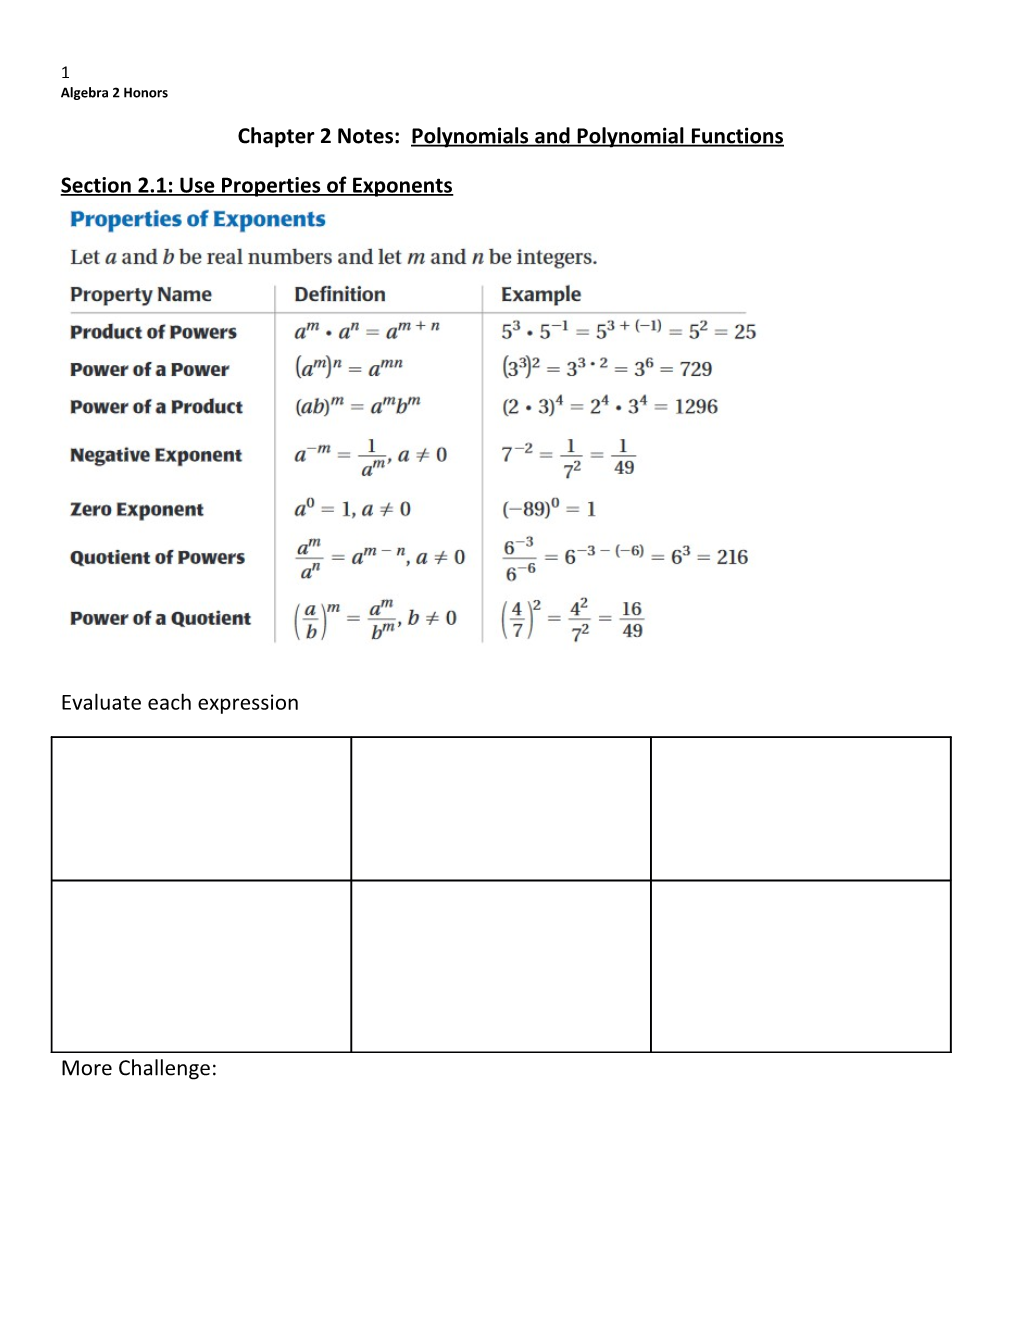 Chapter 2 Notes: Polynomials and Polynomial Functions